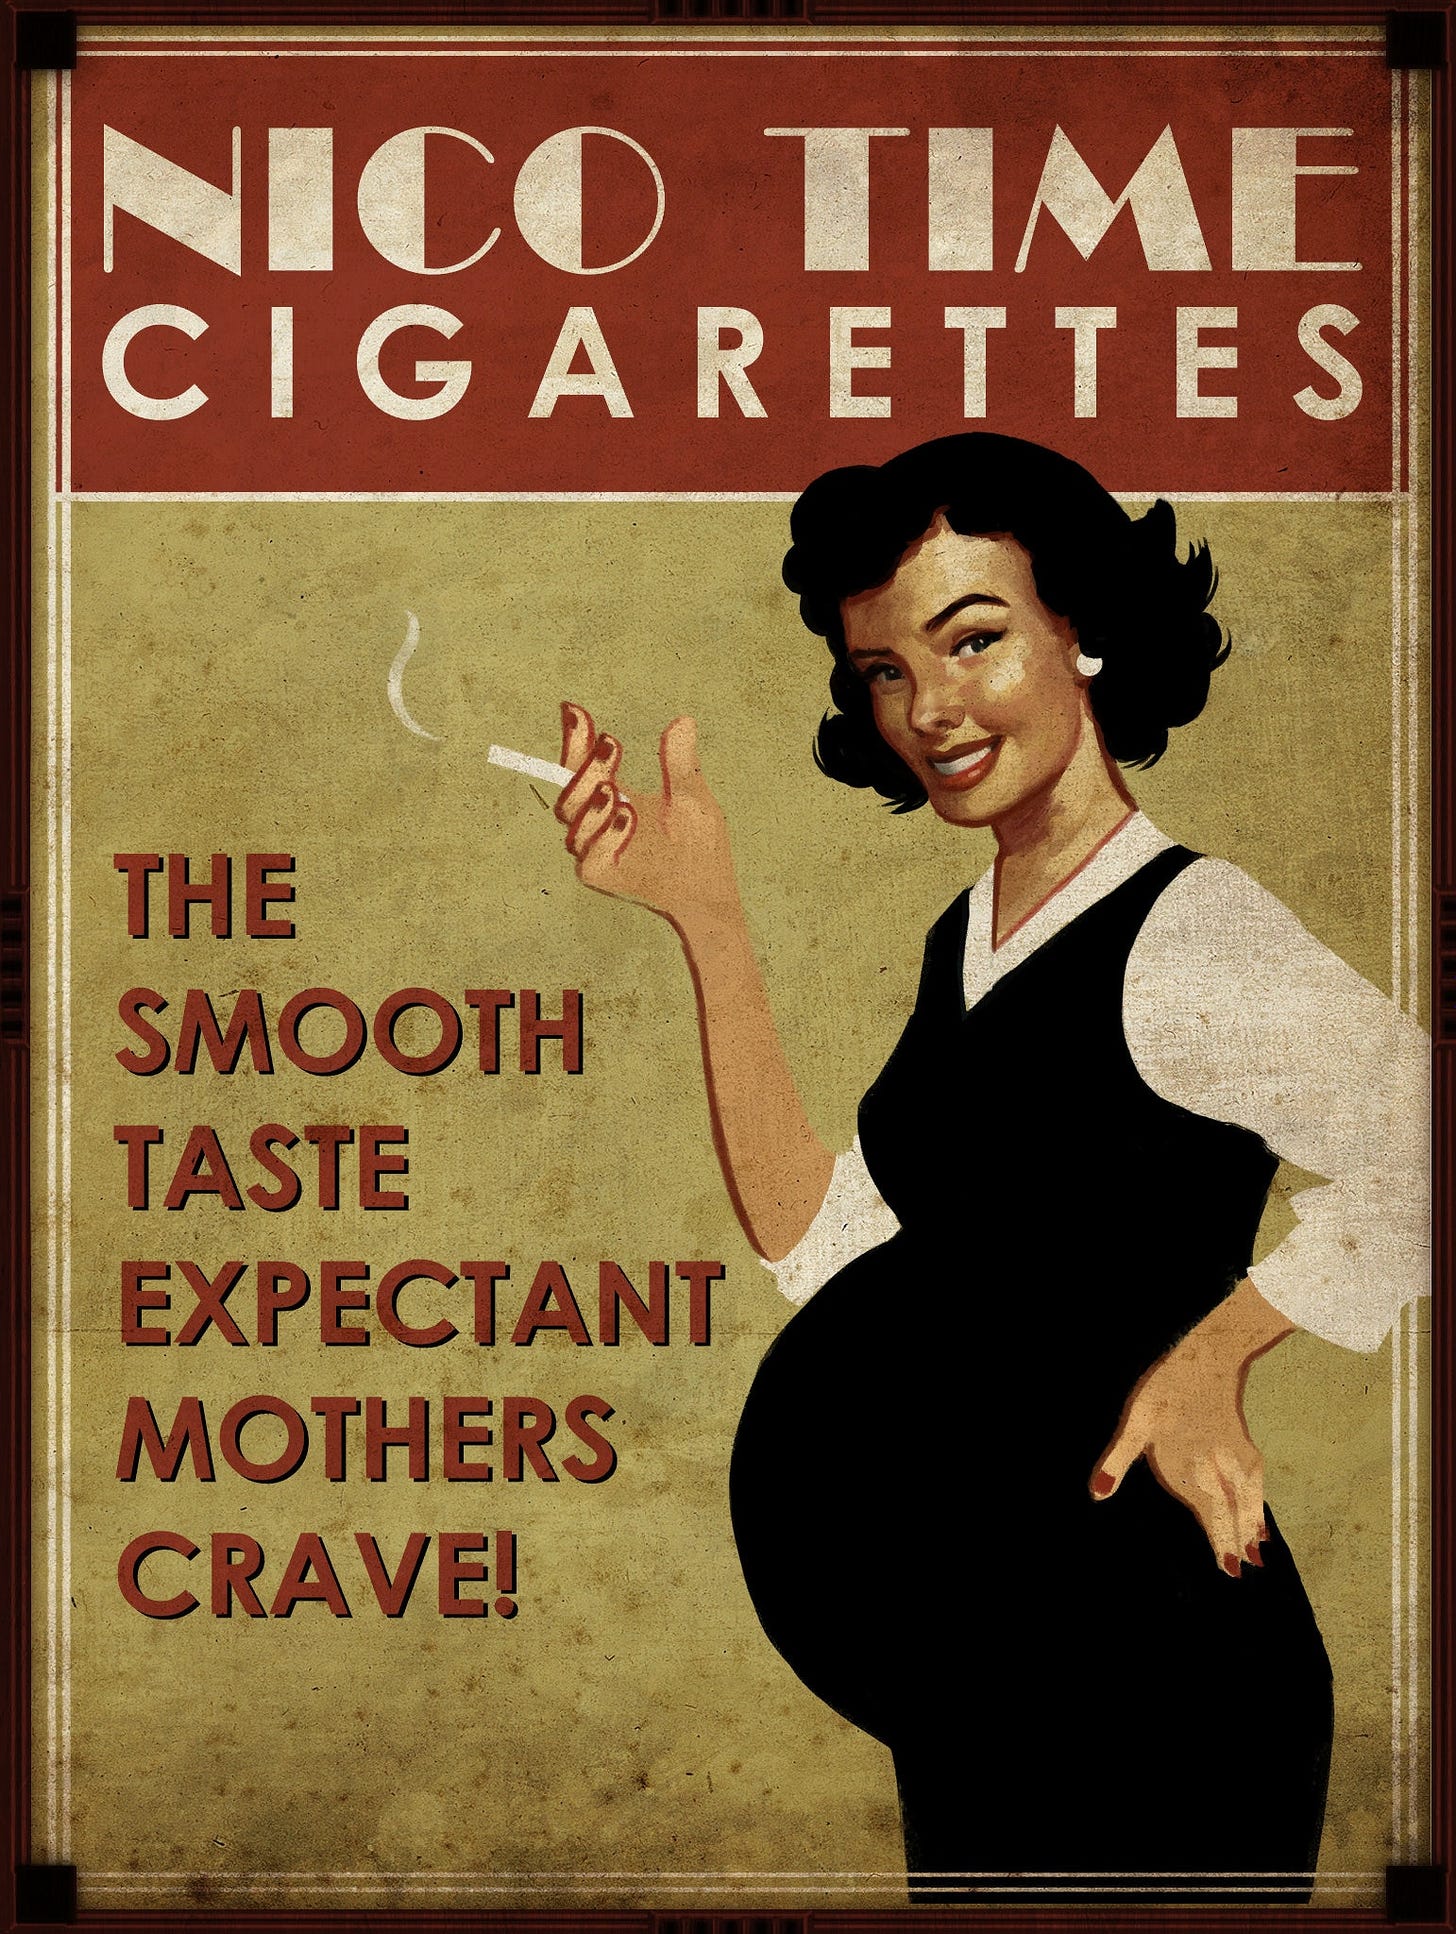 8 X 10 Photo Print Nico Time Cigarettes Expectant Mothers - Etsy